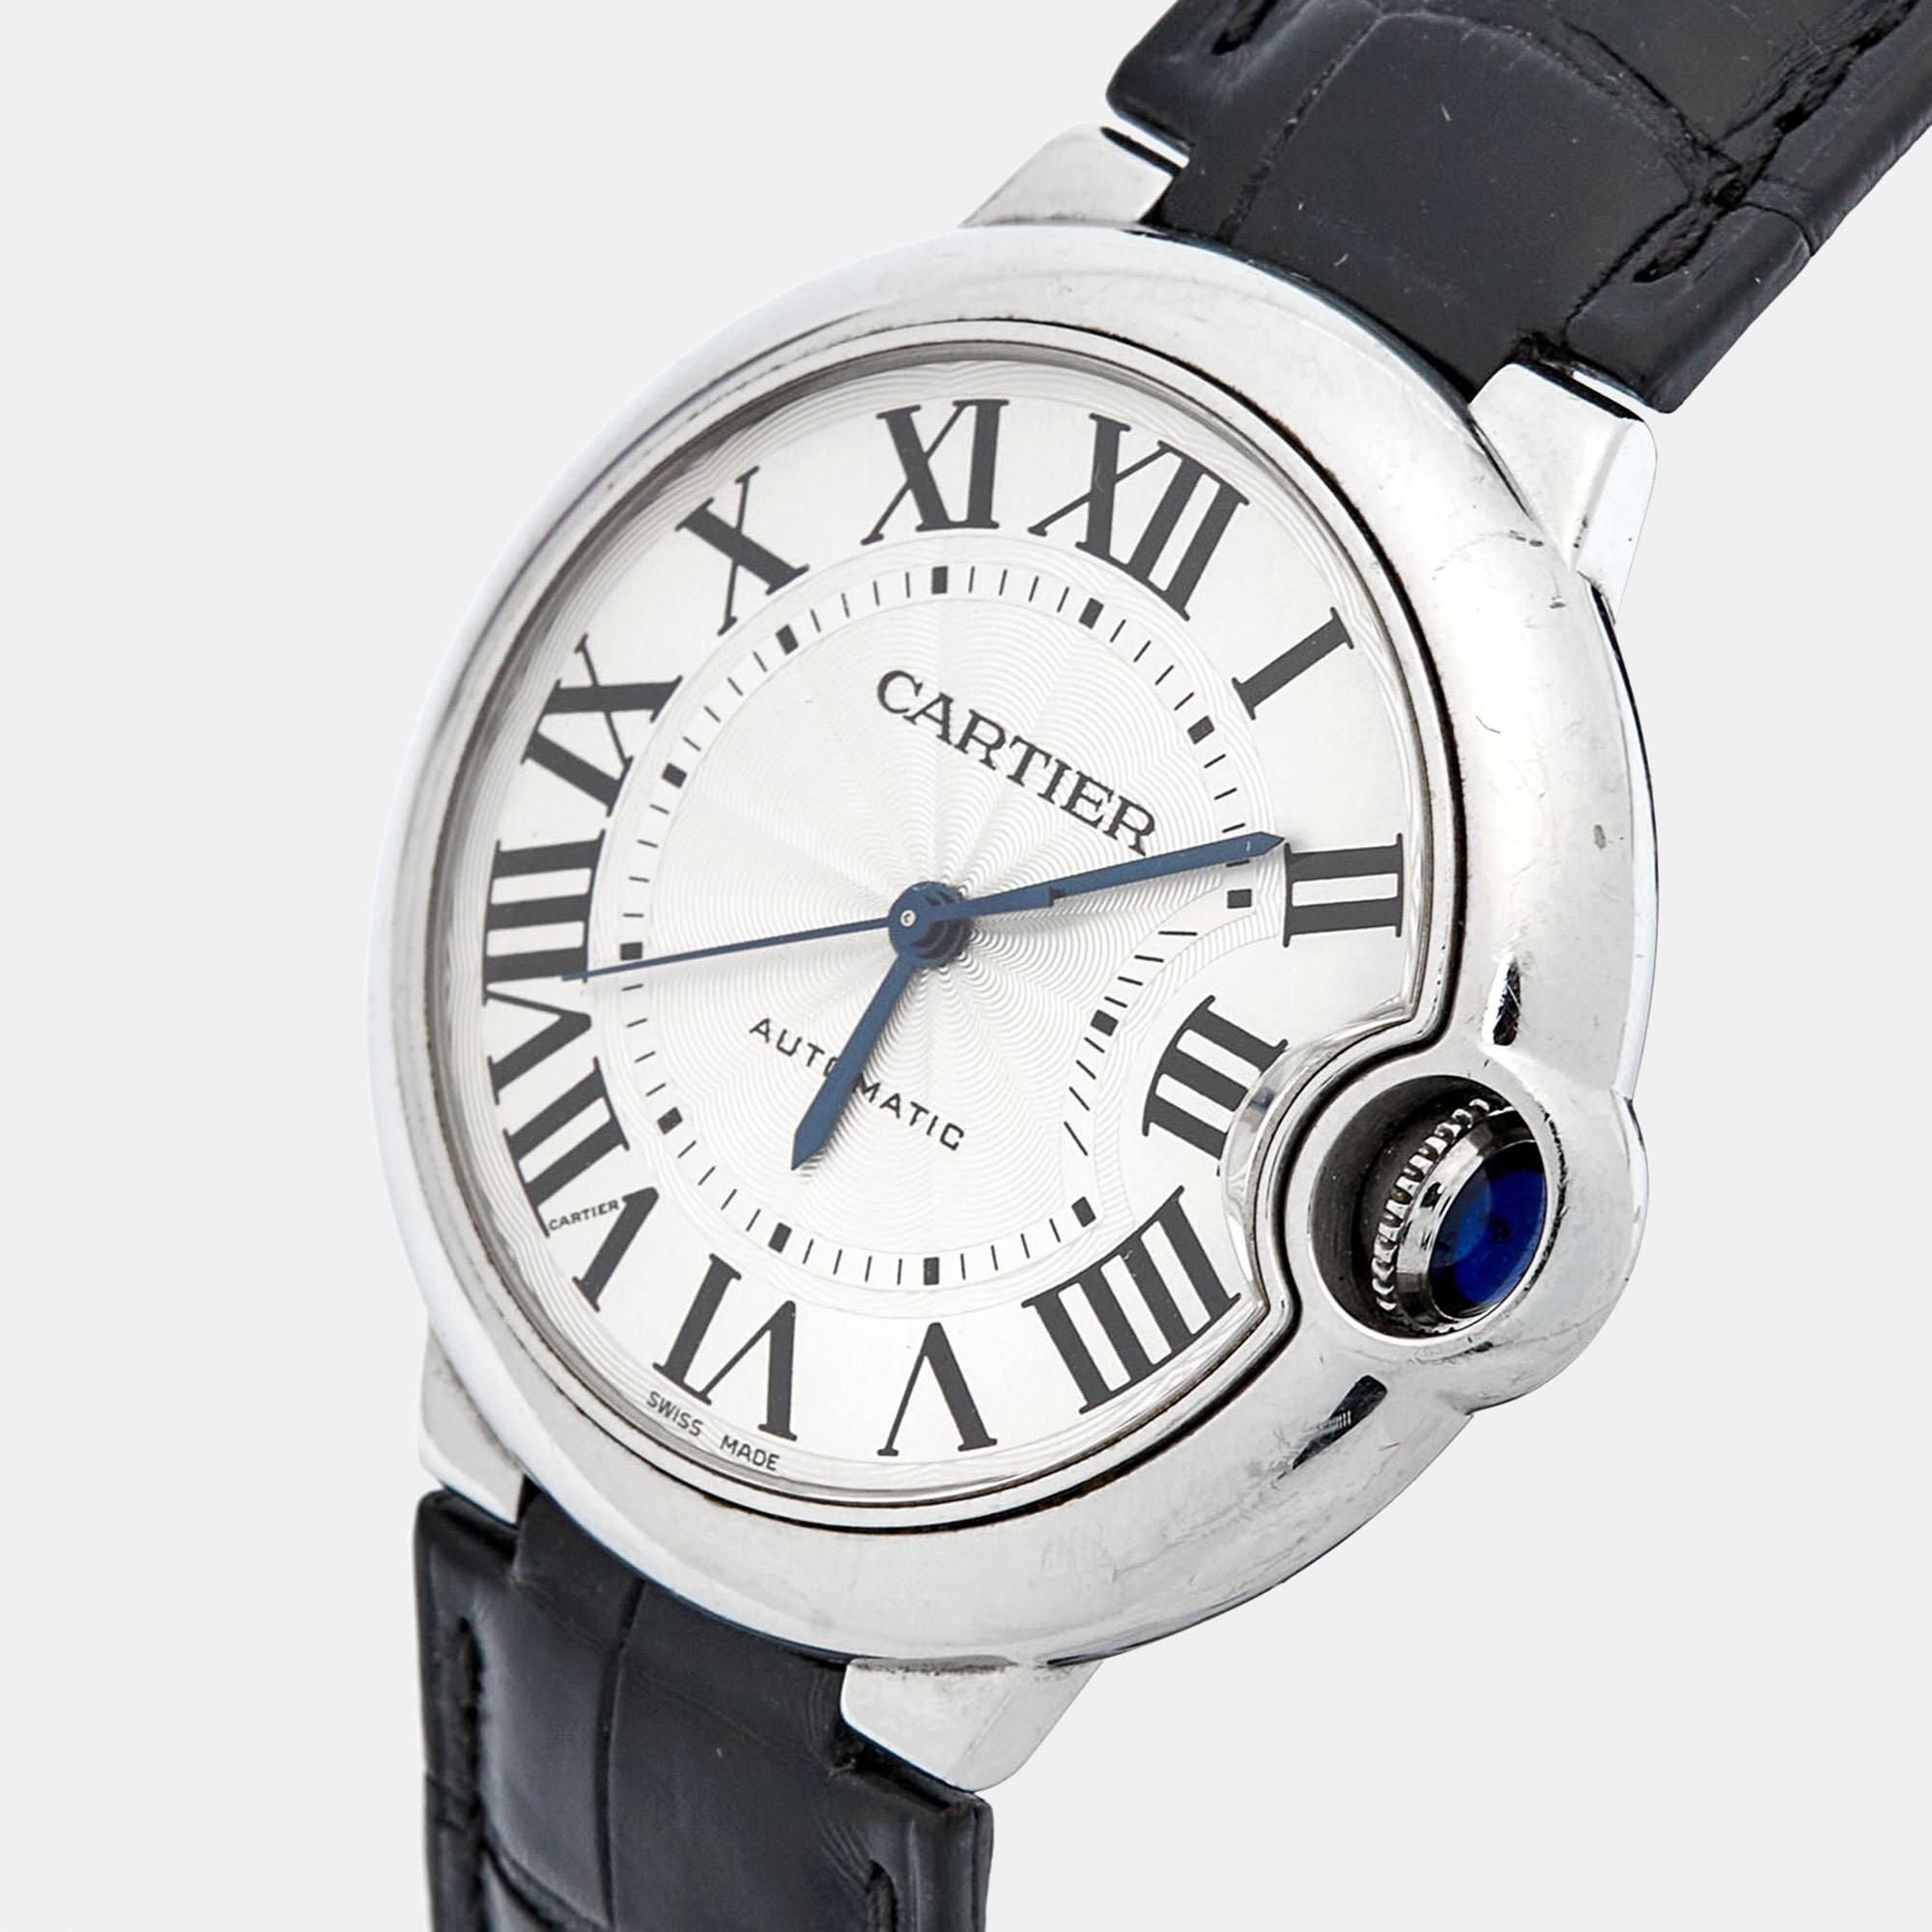 First created in 2007, the Cartier Ballon Bleu watch is a song of details and harmony. The now-iconic watch gets its identity from the guarded blue bubble of the winding crown on the side. The Ballon Bleu WSBB0028 watch we have here is for women,